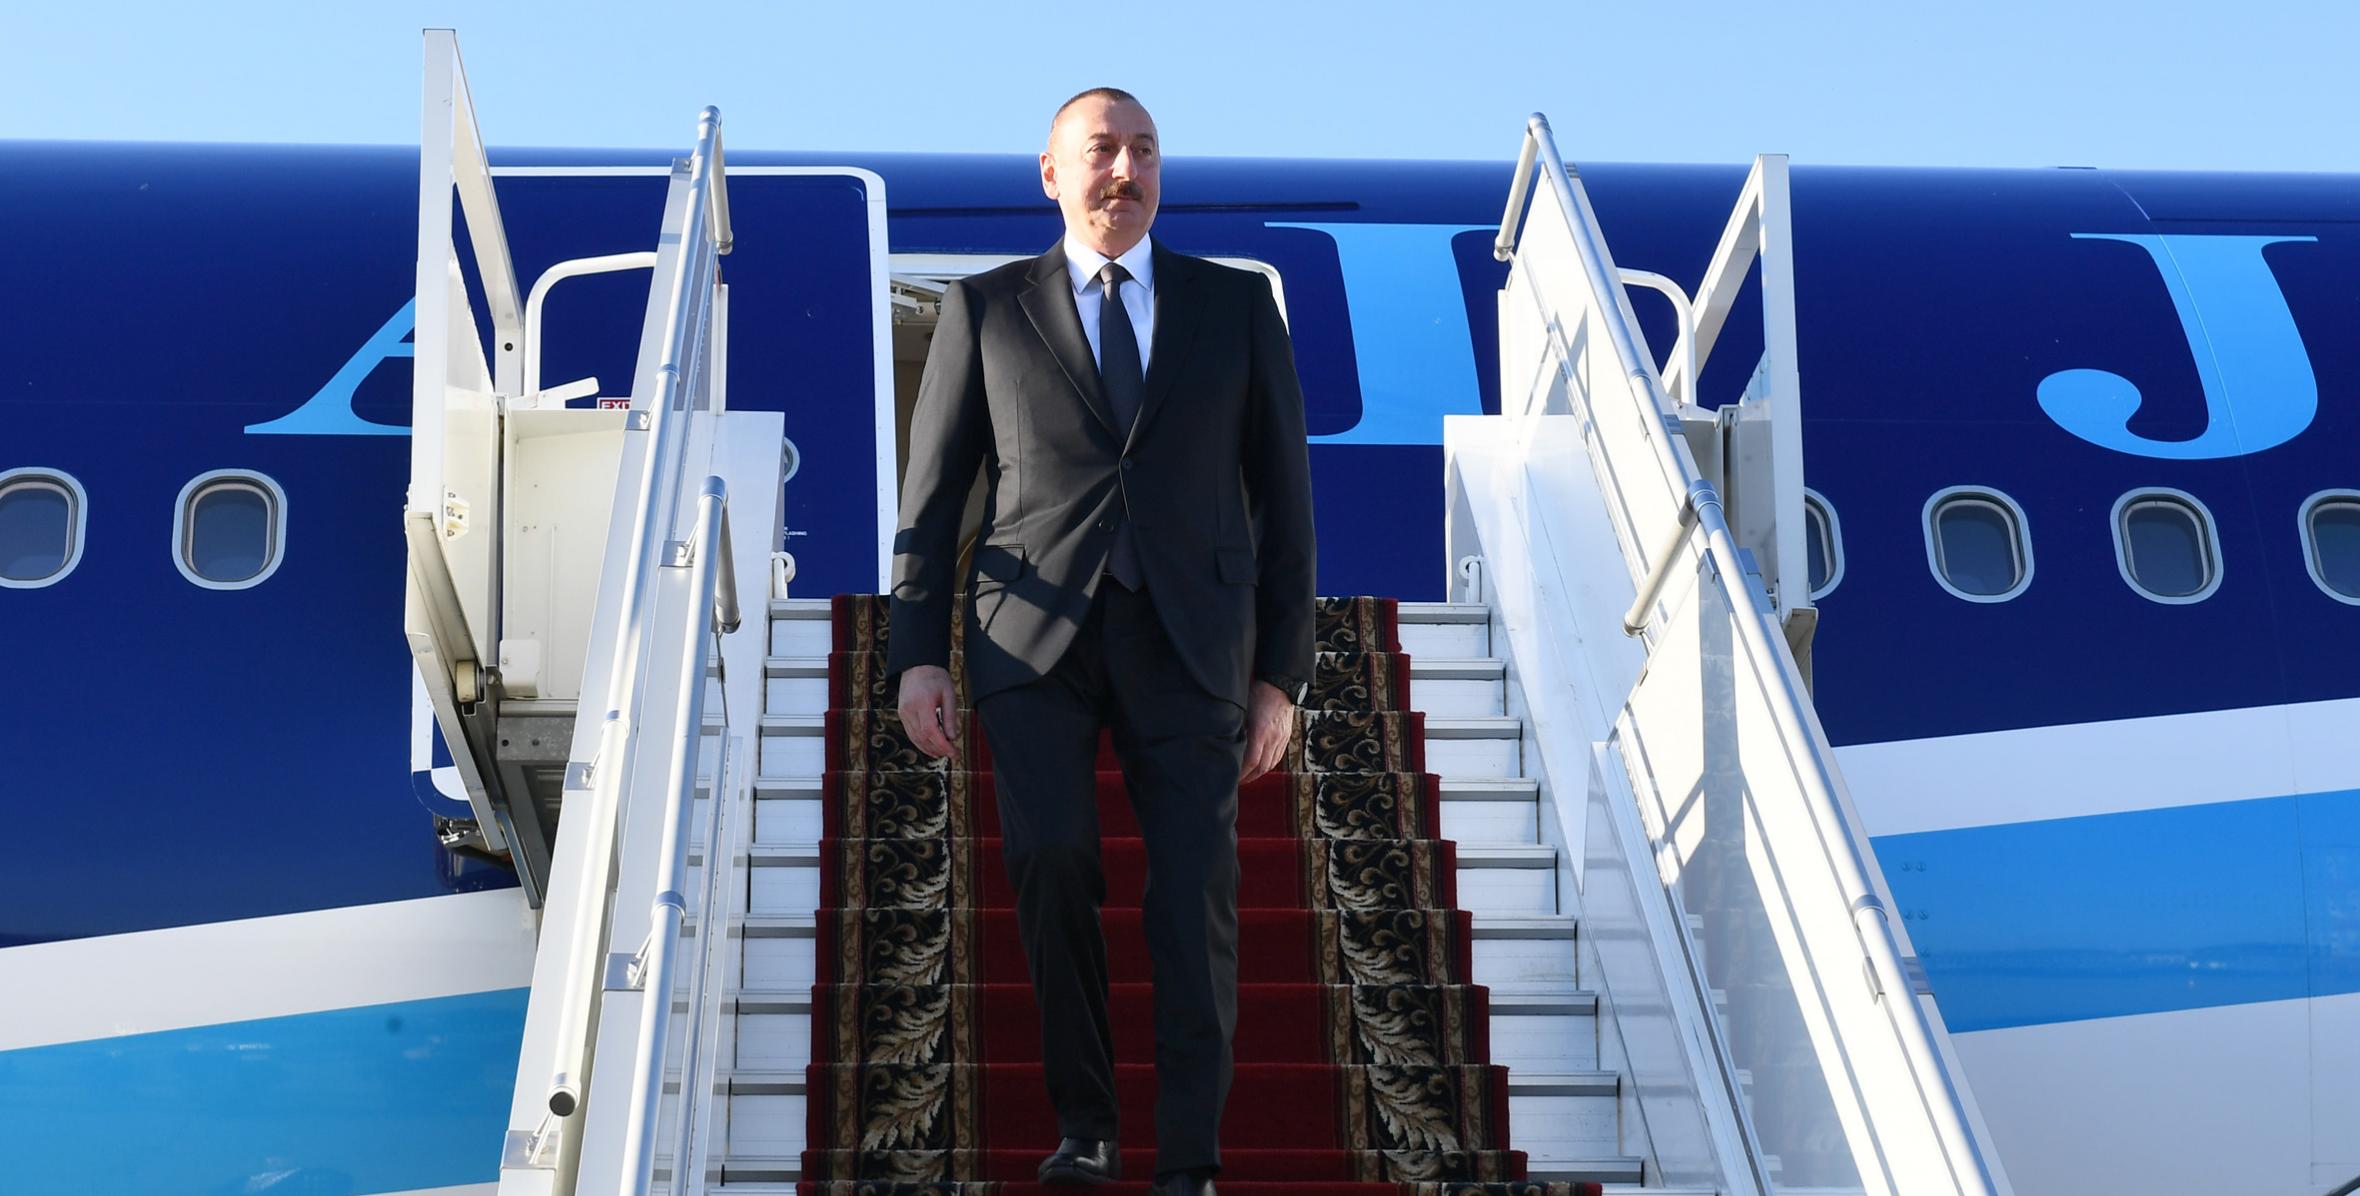 Ilham Aliyev arrived in Russian Federation for working visit